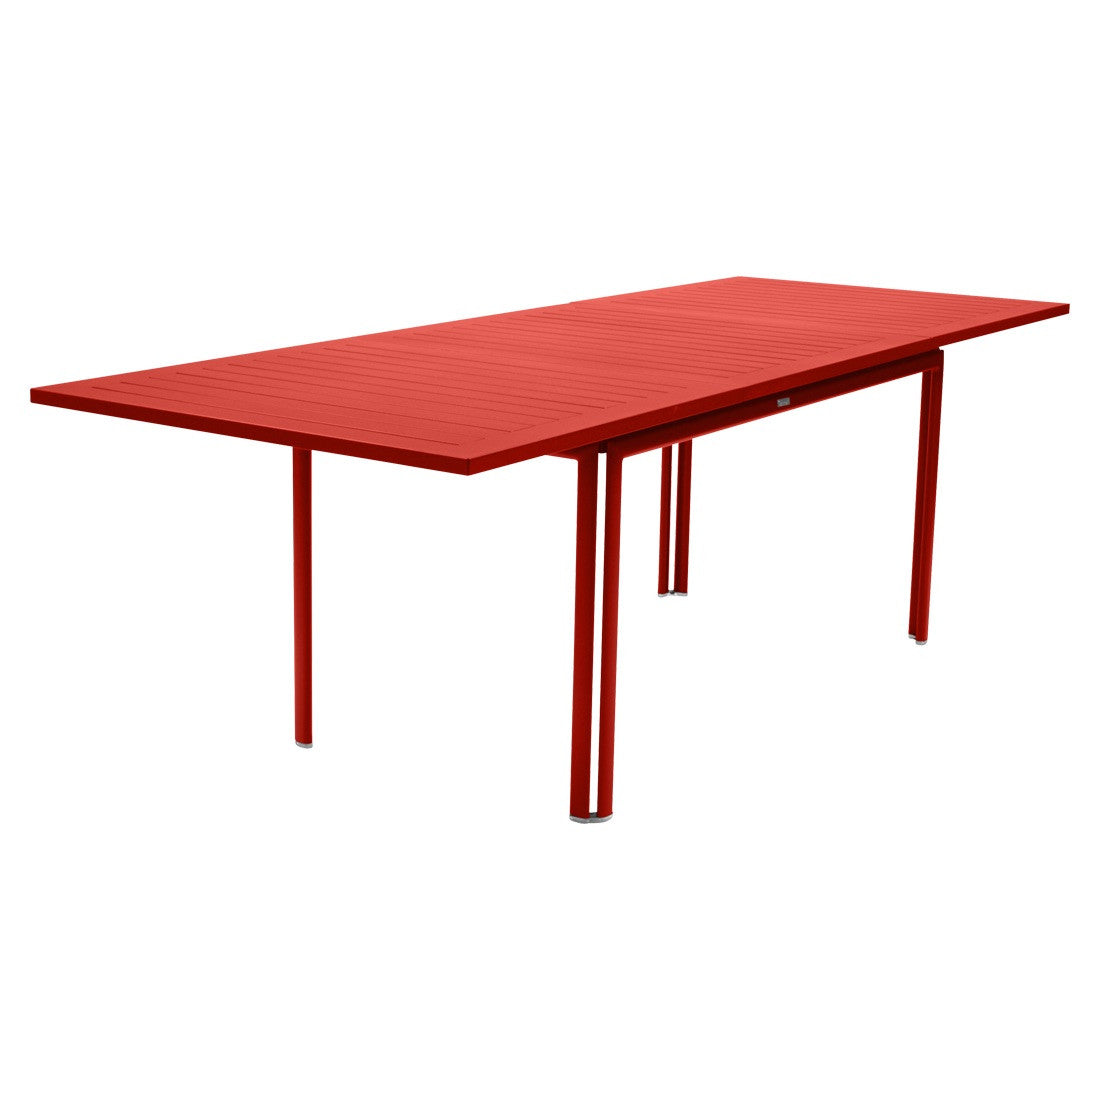 Fermob Costa Extending Dining Table - bonmarche